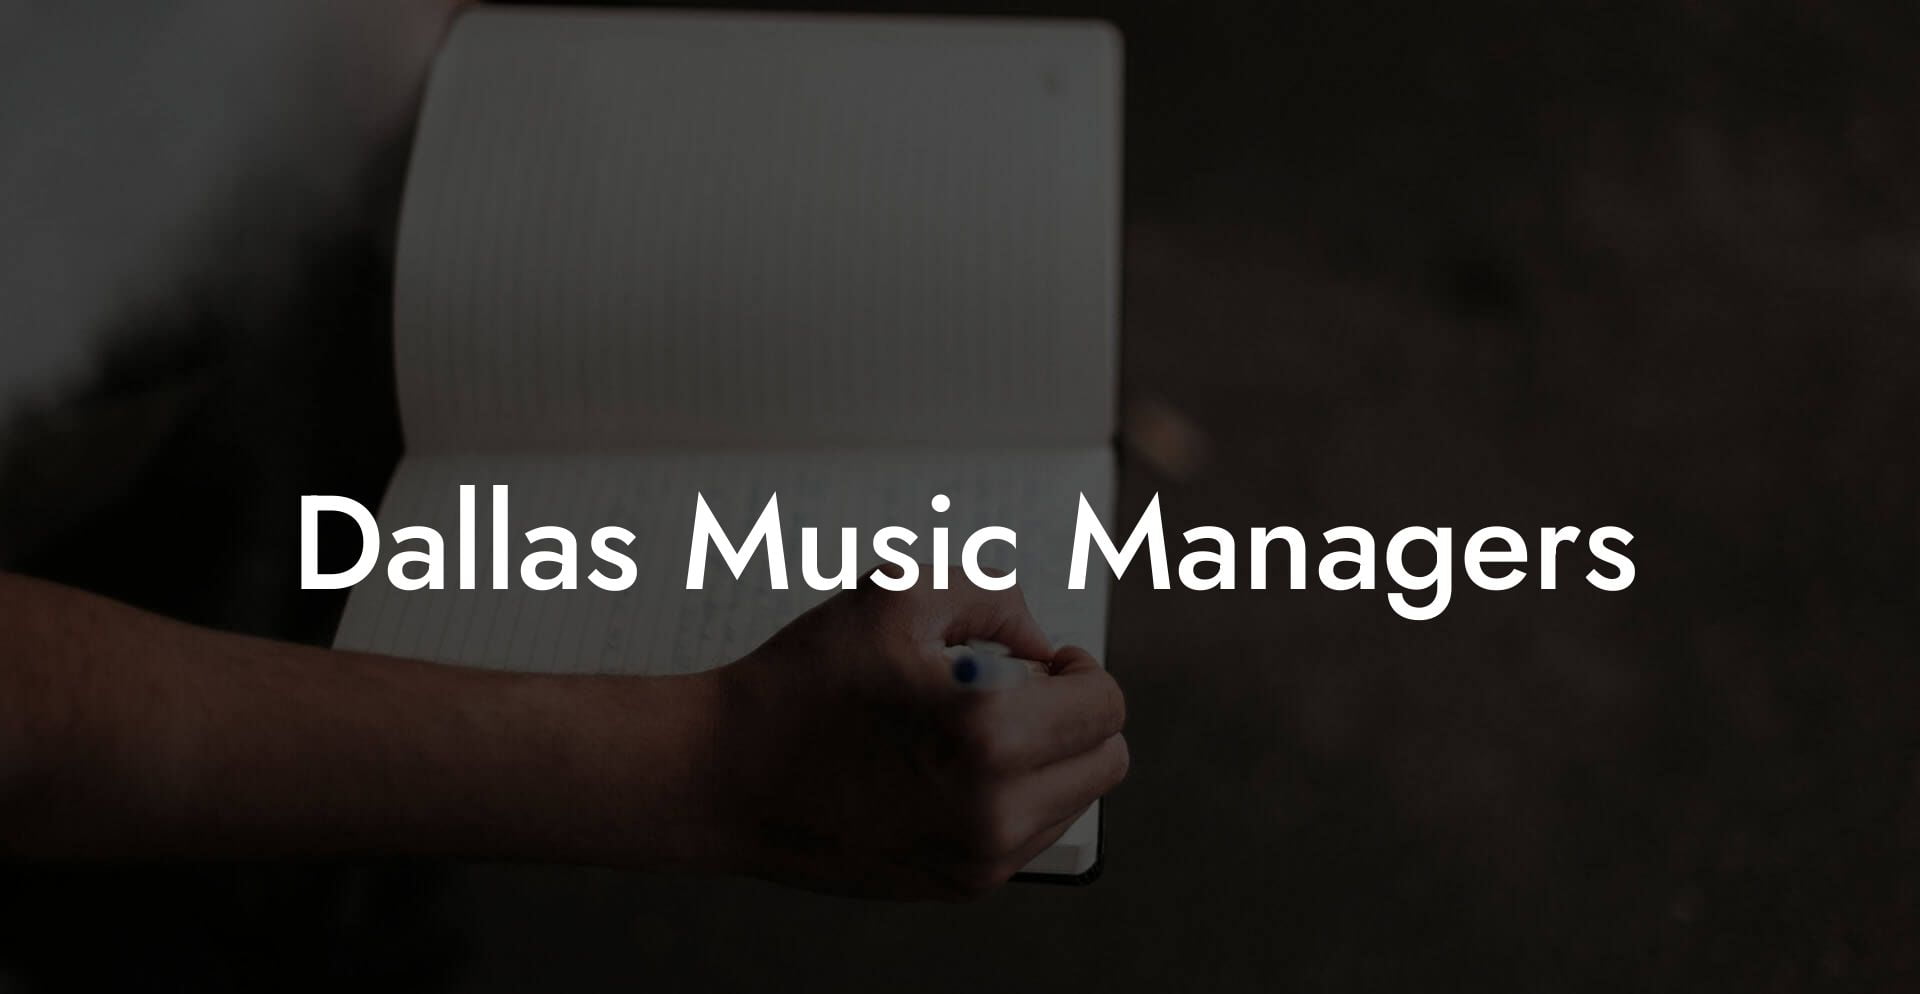 Dallas Music Managers